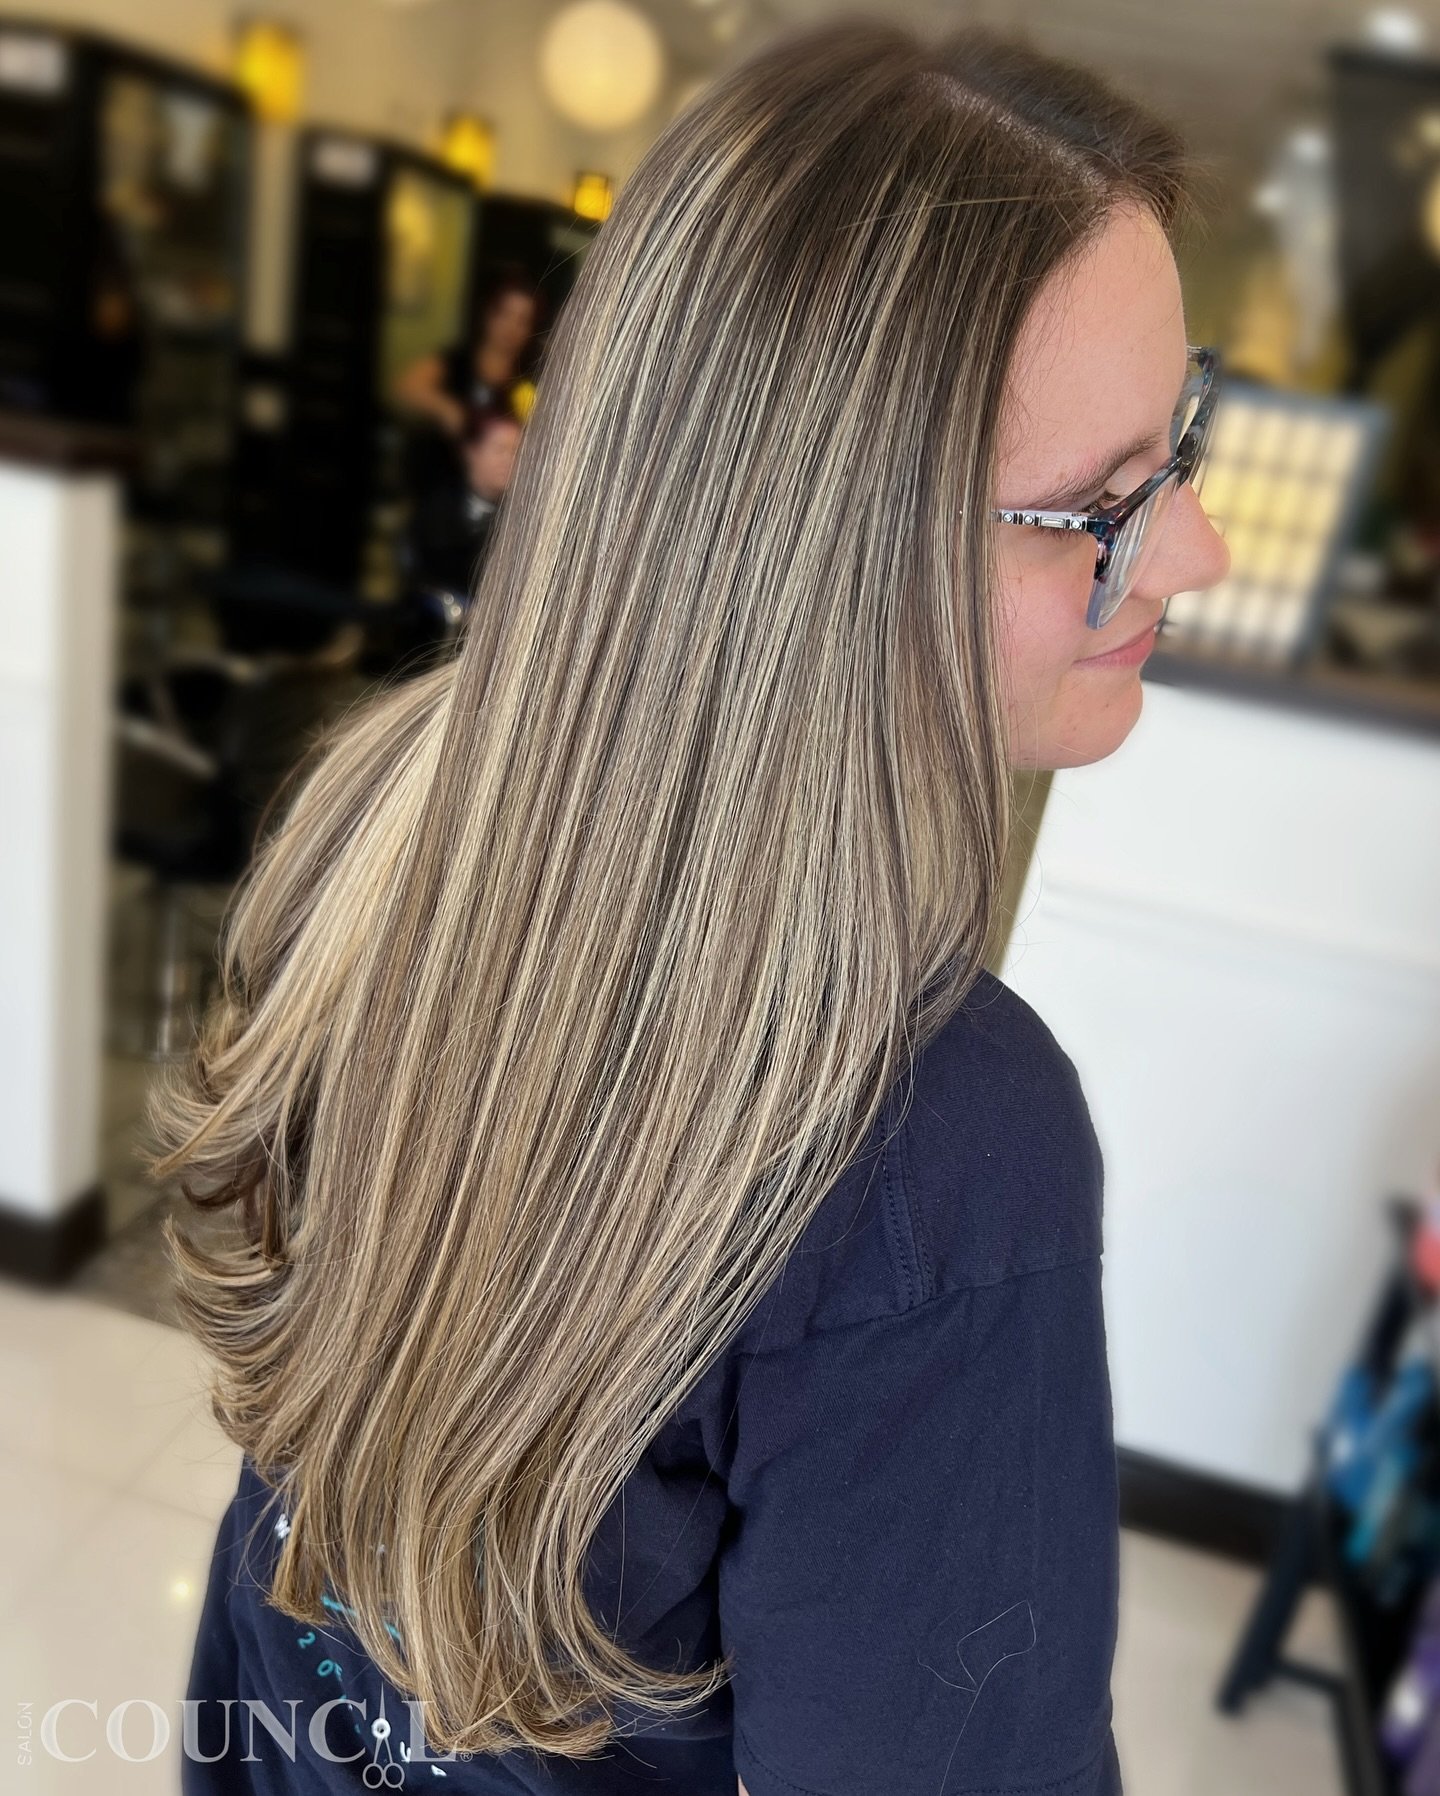 🌿#firsttimehaircolor 
Stepping into the spotlight with my first-ever partial teasylights, fused with a perfect toner and Fusio-Dose treatment, all finished with a fabulous blowdry! ✨ 
Feeling fresh and fabulous. #HairTransformation #NewLook

TEASYLI